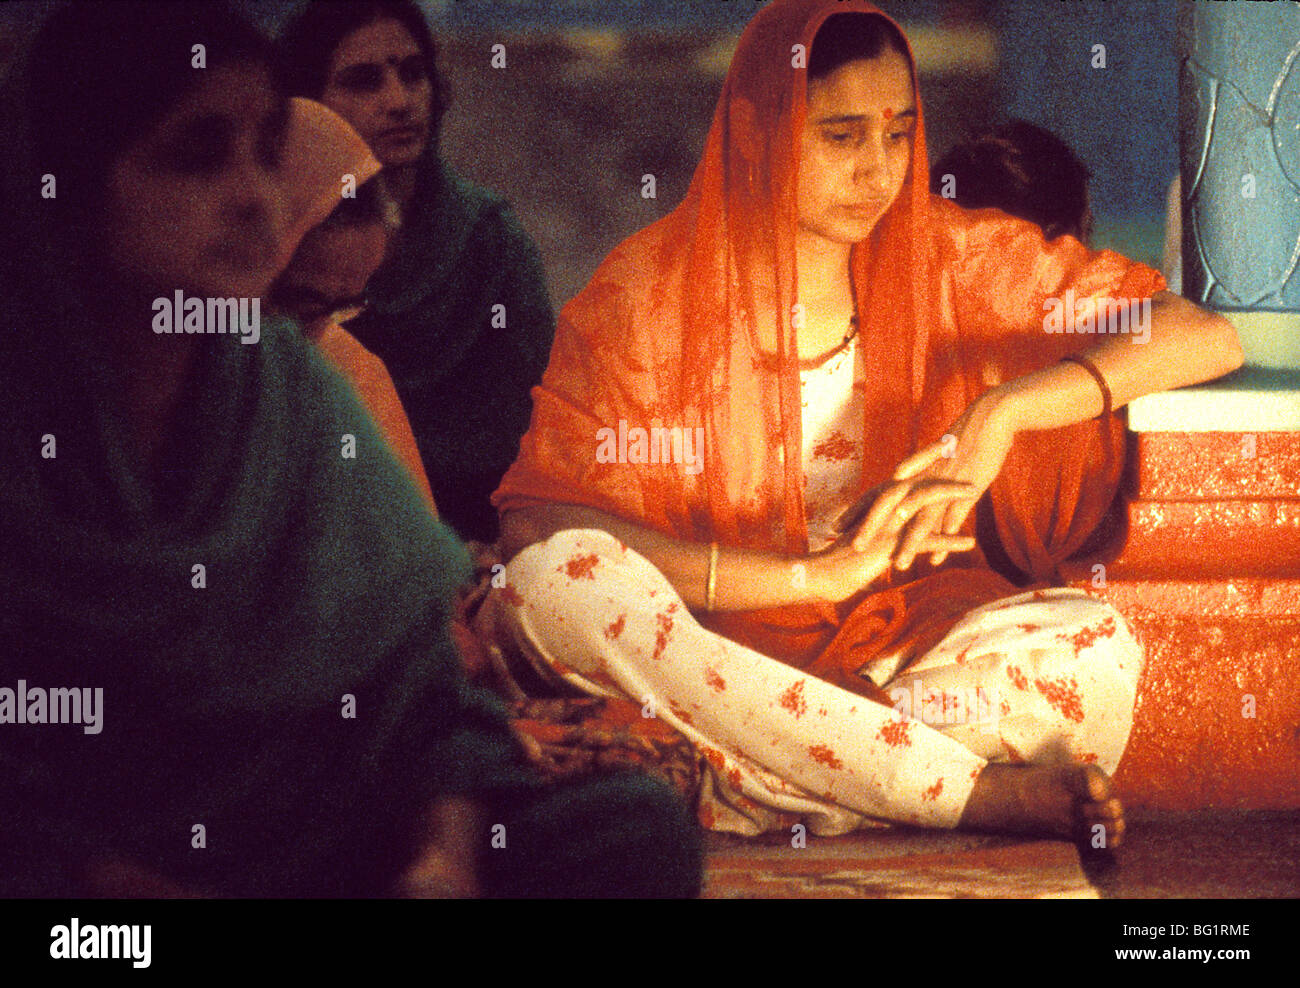 Hindu women worship and pray in a small temple in Palampur, India Stock Photo